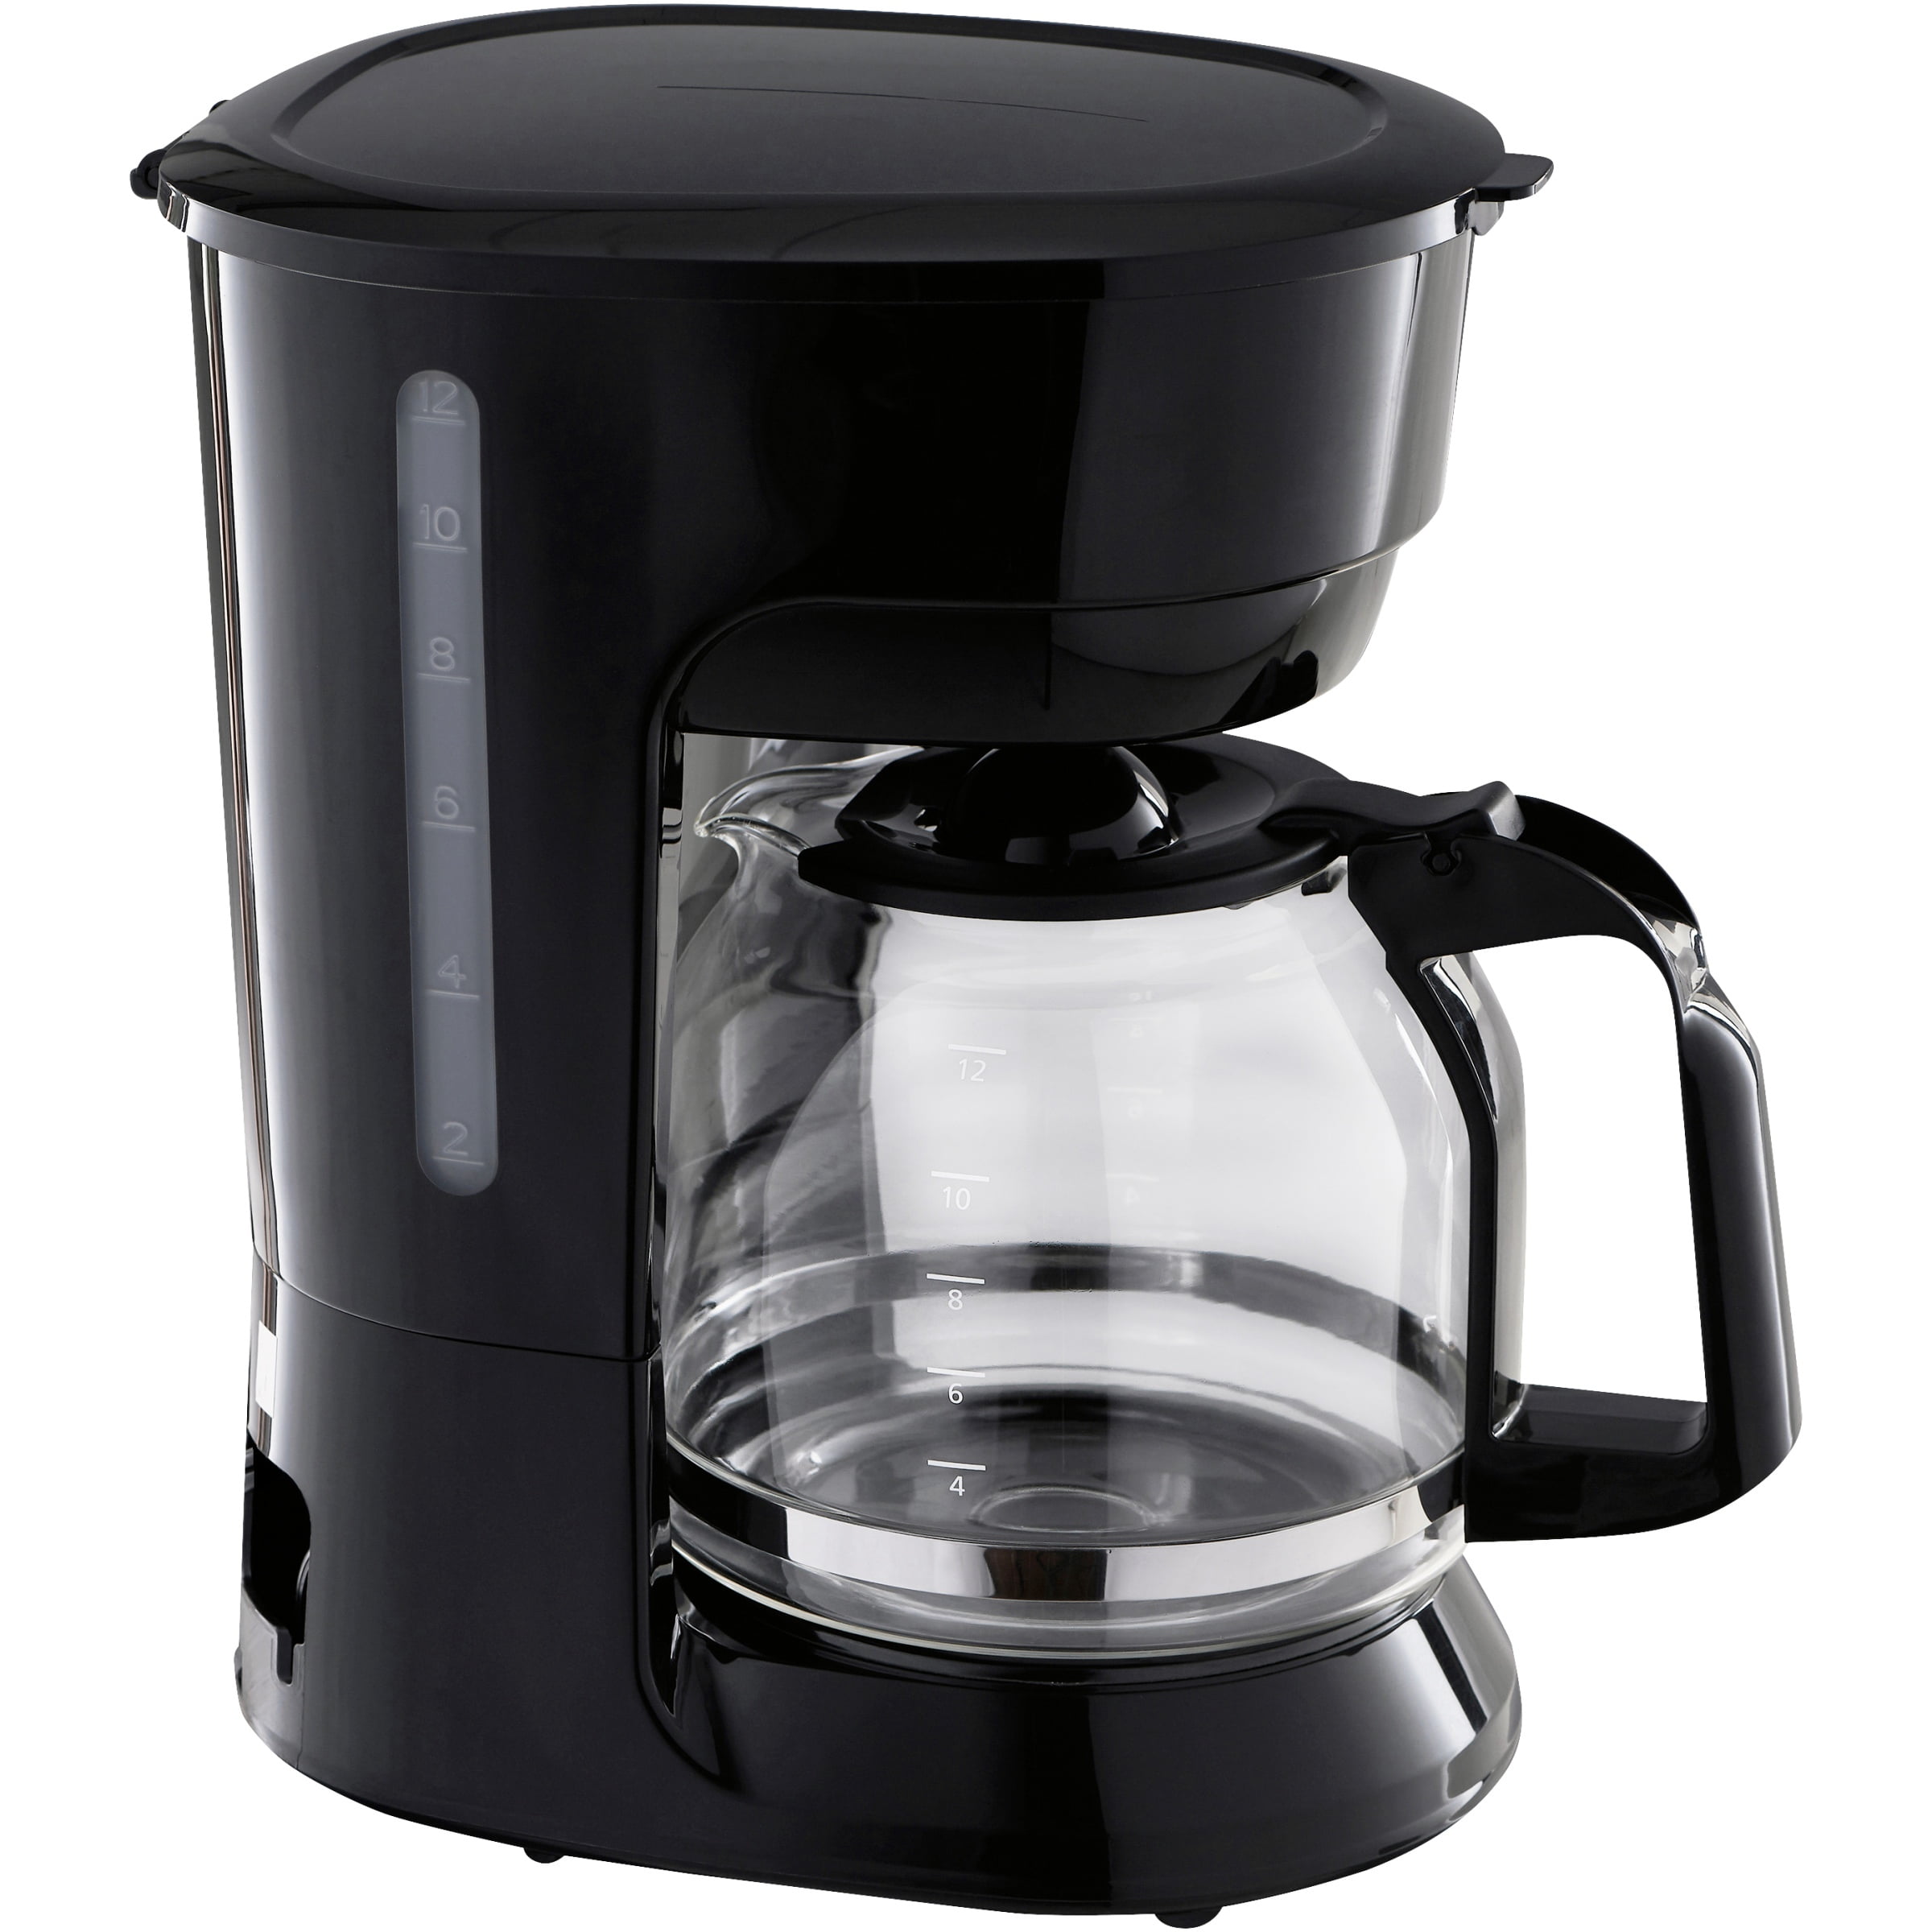 Mainstays Black 12-Cup Coffee Maker with Removable Filter Basket 